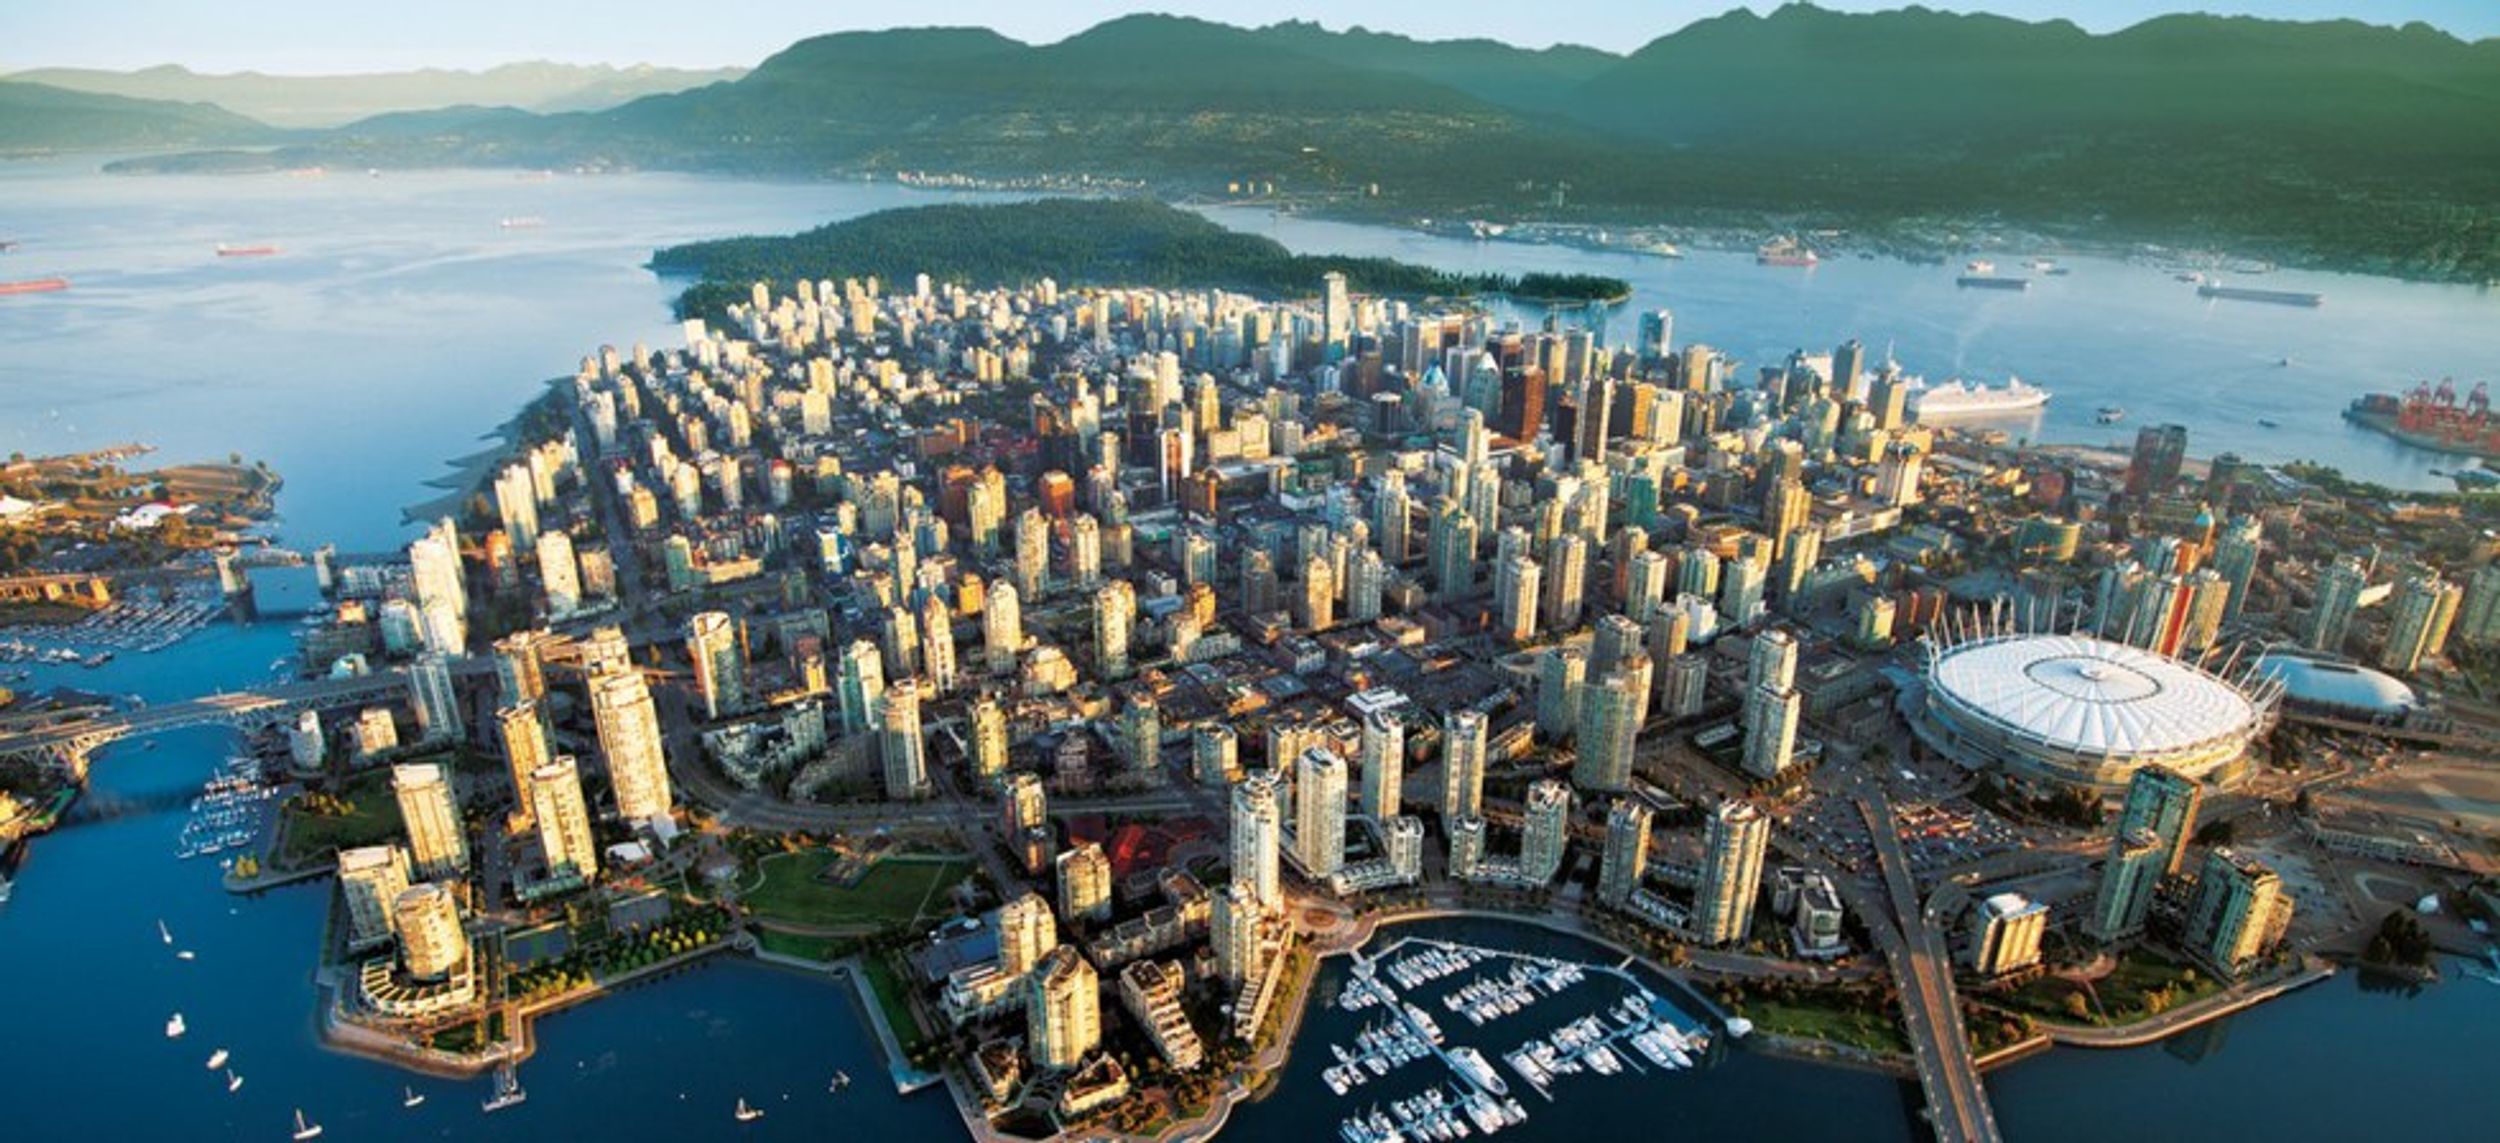 7 Reasons Why British Columbia Is The Best Place On Earth